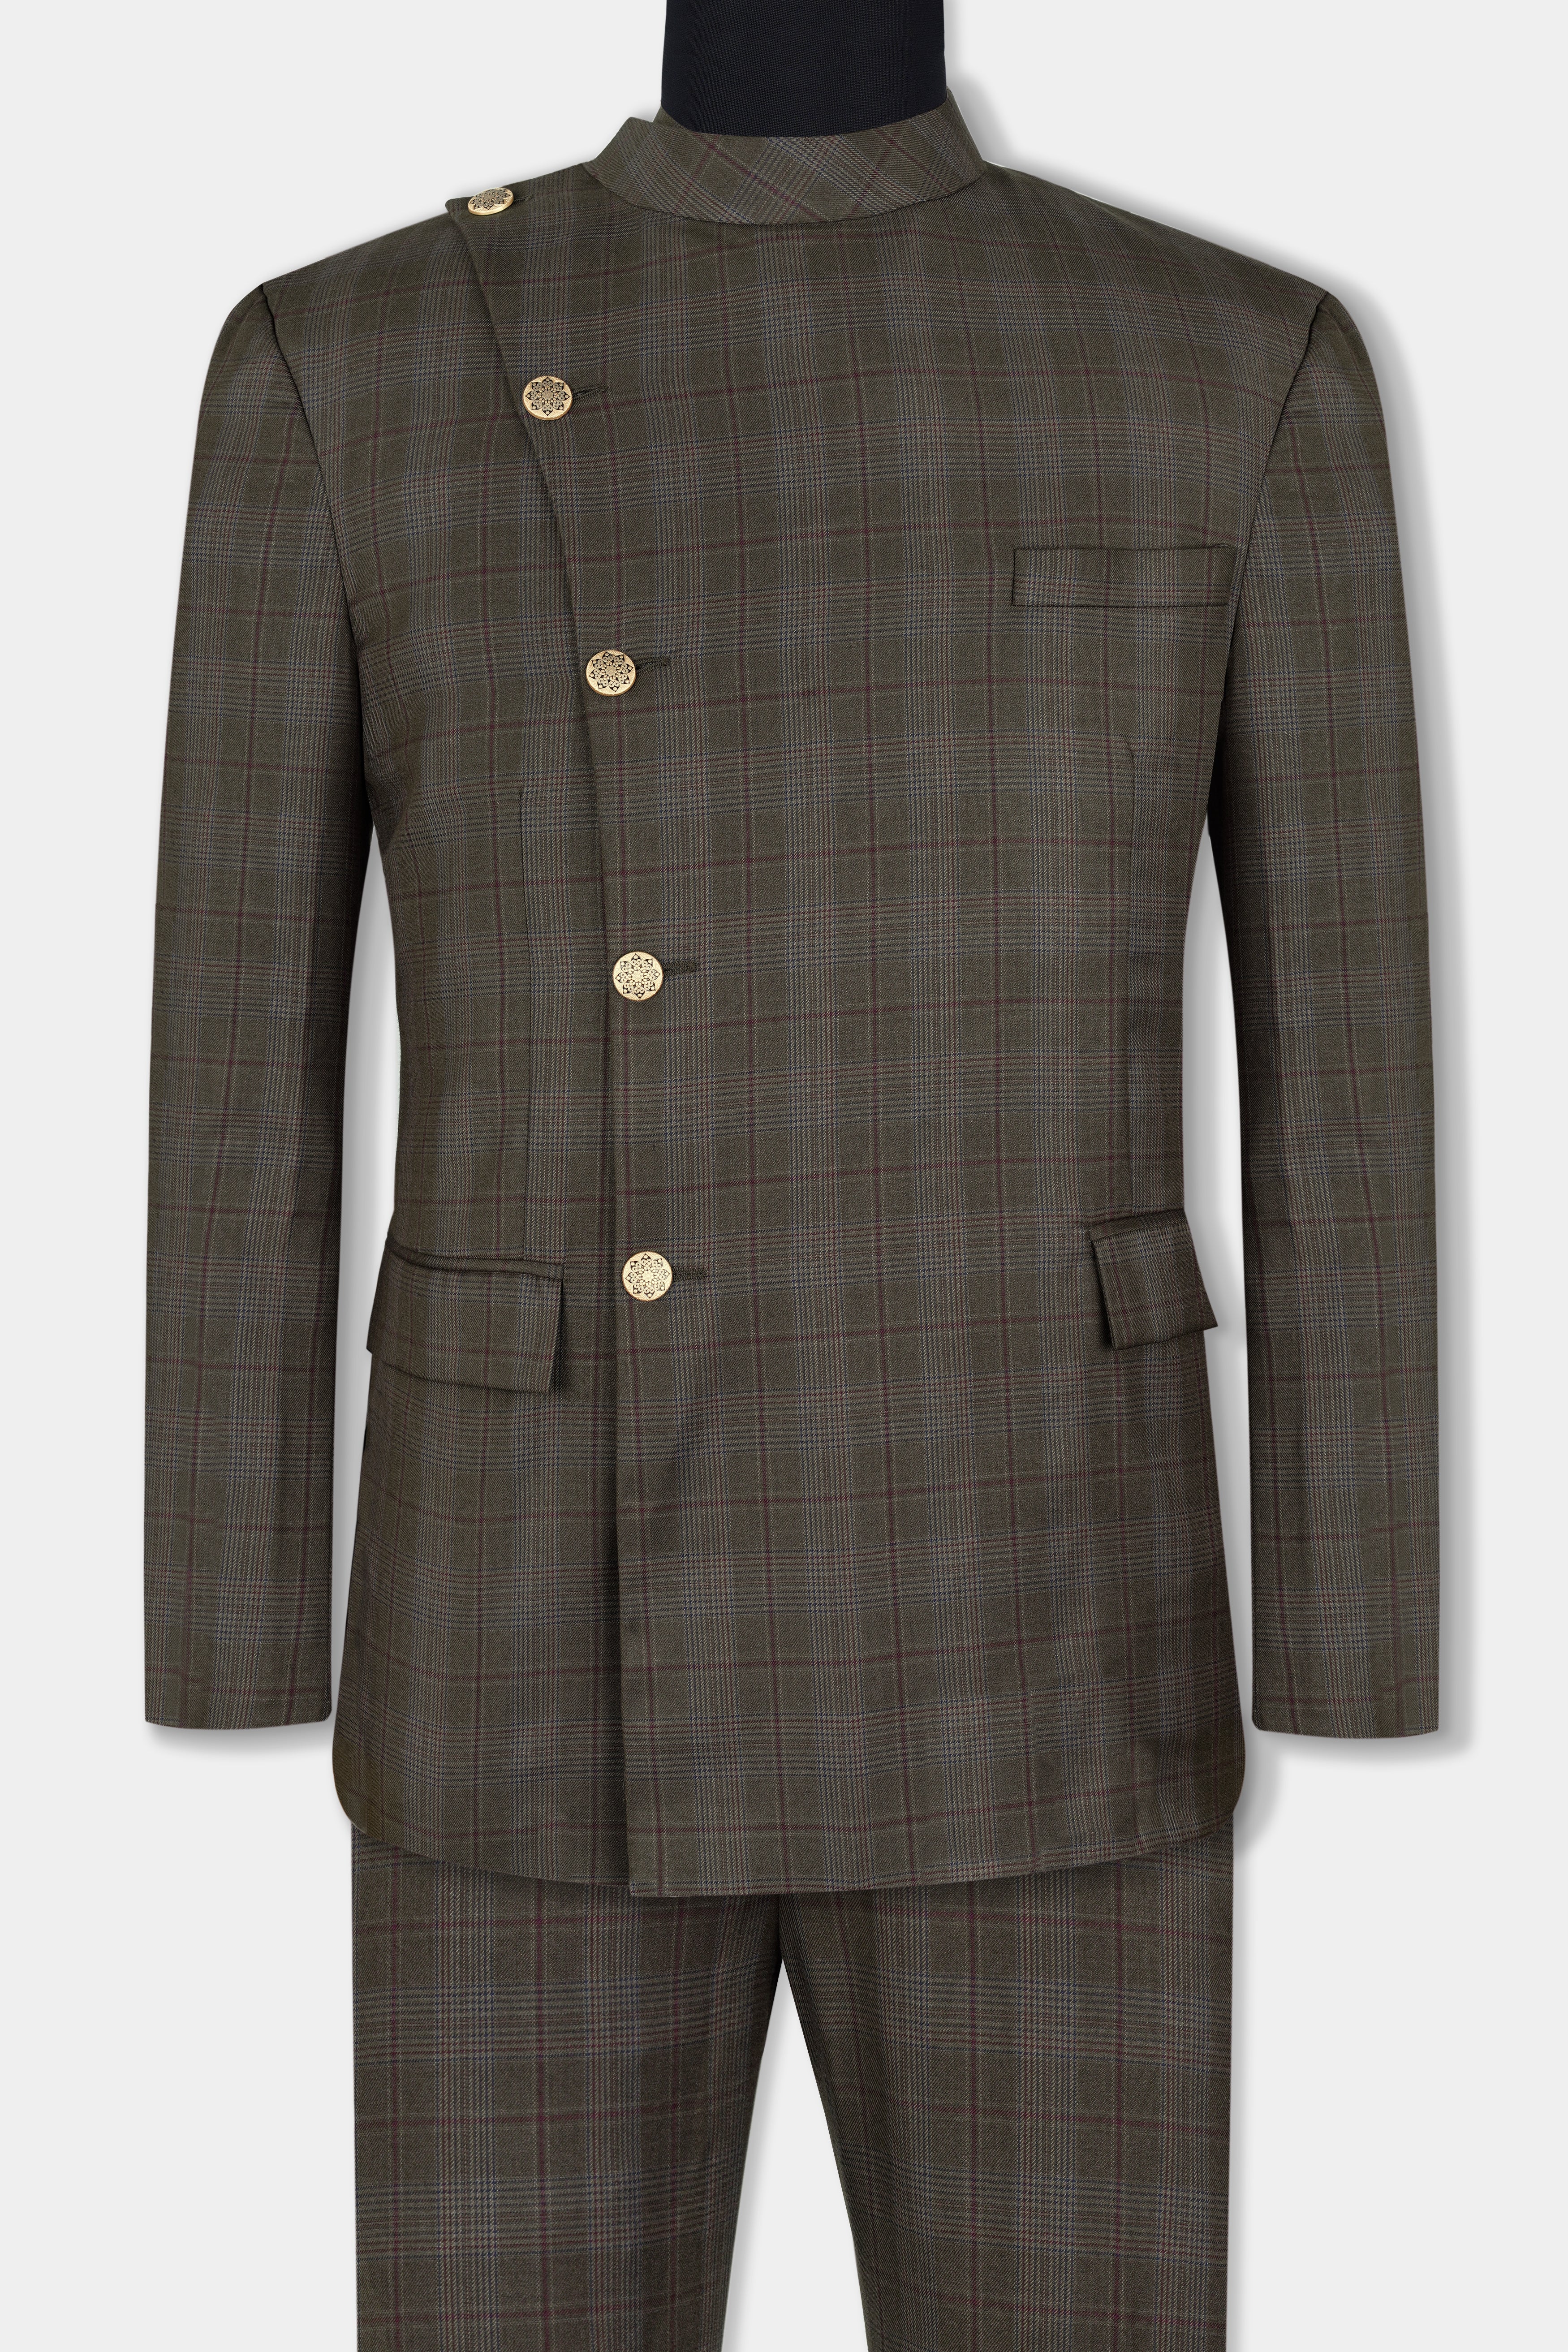 Fuscous Green and Bistre Brown Plaid Wool Rich Cross Buttoned Bandhgala Suit ST2951-CBG2-36, ST2951-CBG2-38, ST2951-CBG2-40, ST2951-CBG2-42, ST2951-CBG2-44, ST2951-CBG2-46, ST2951-CBG2-48, ST2951-CBG2-50, ST2951-CBG2-52, ST2951-CBG2-54, ST2951-CBG2-56, ST2951-CBG2-58, ST2951-CBG2-60